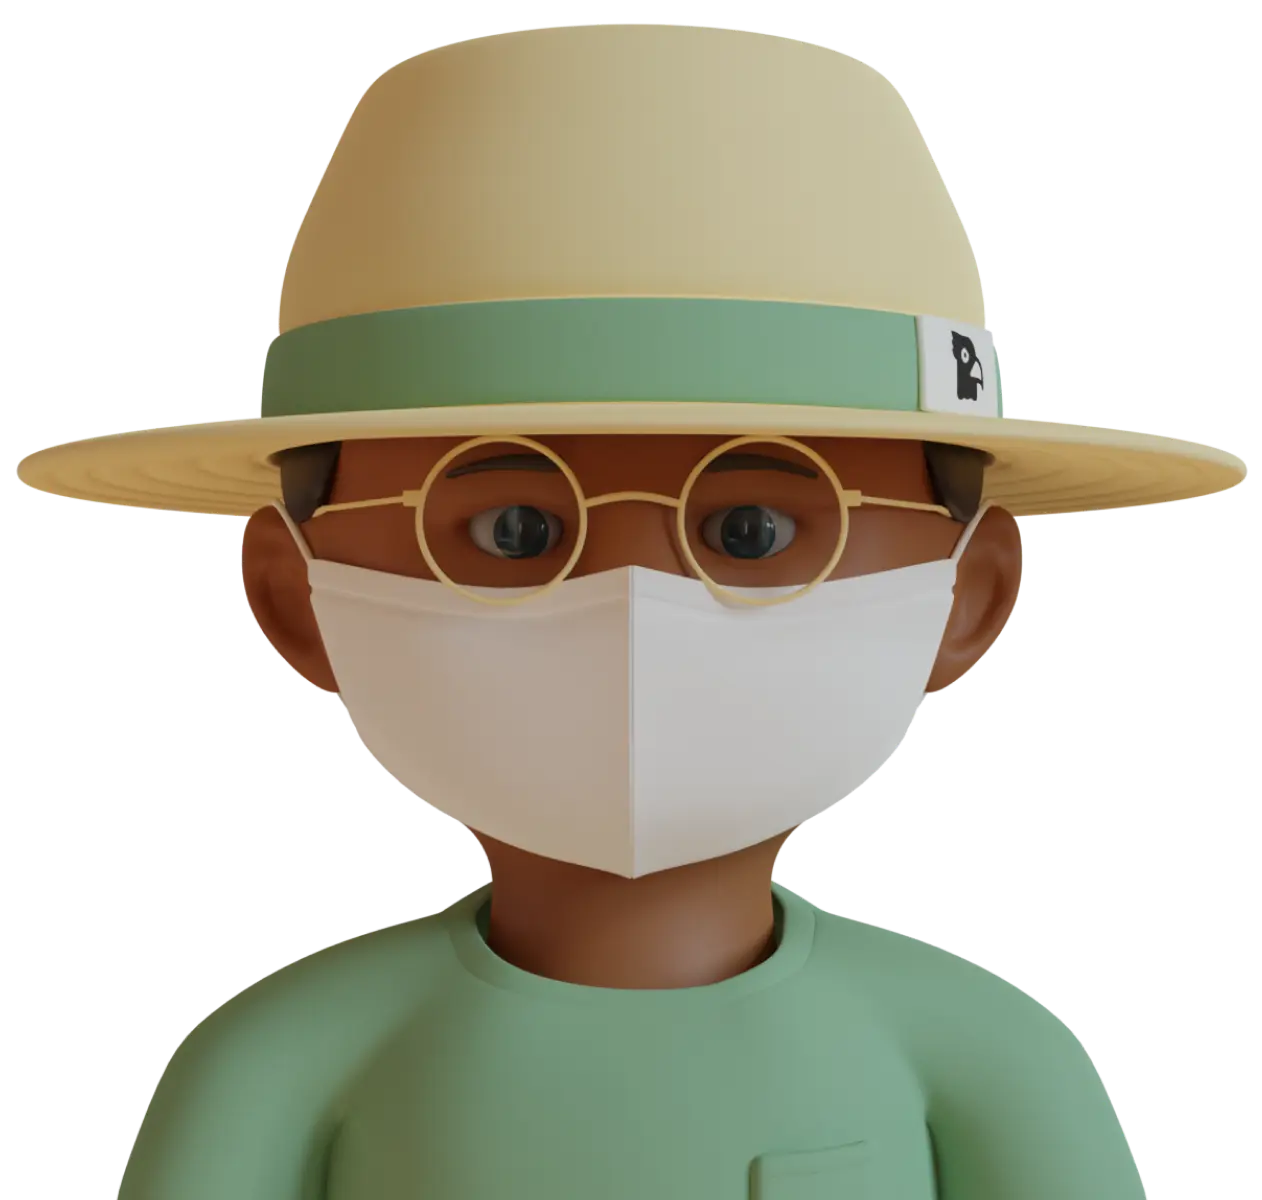 Character with beige hat, green band, round glasses, and white facemask; digital illustration.